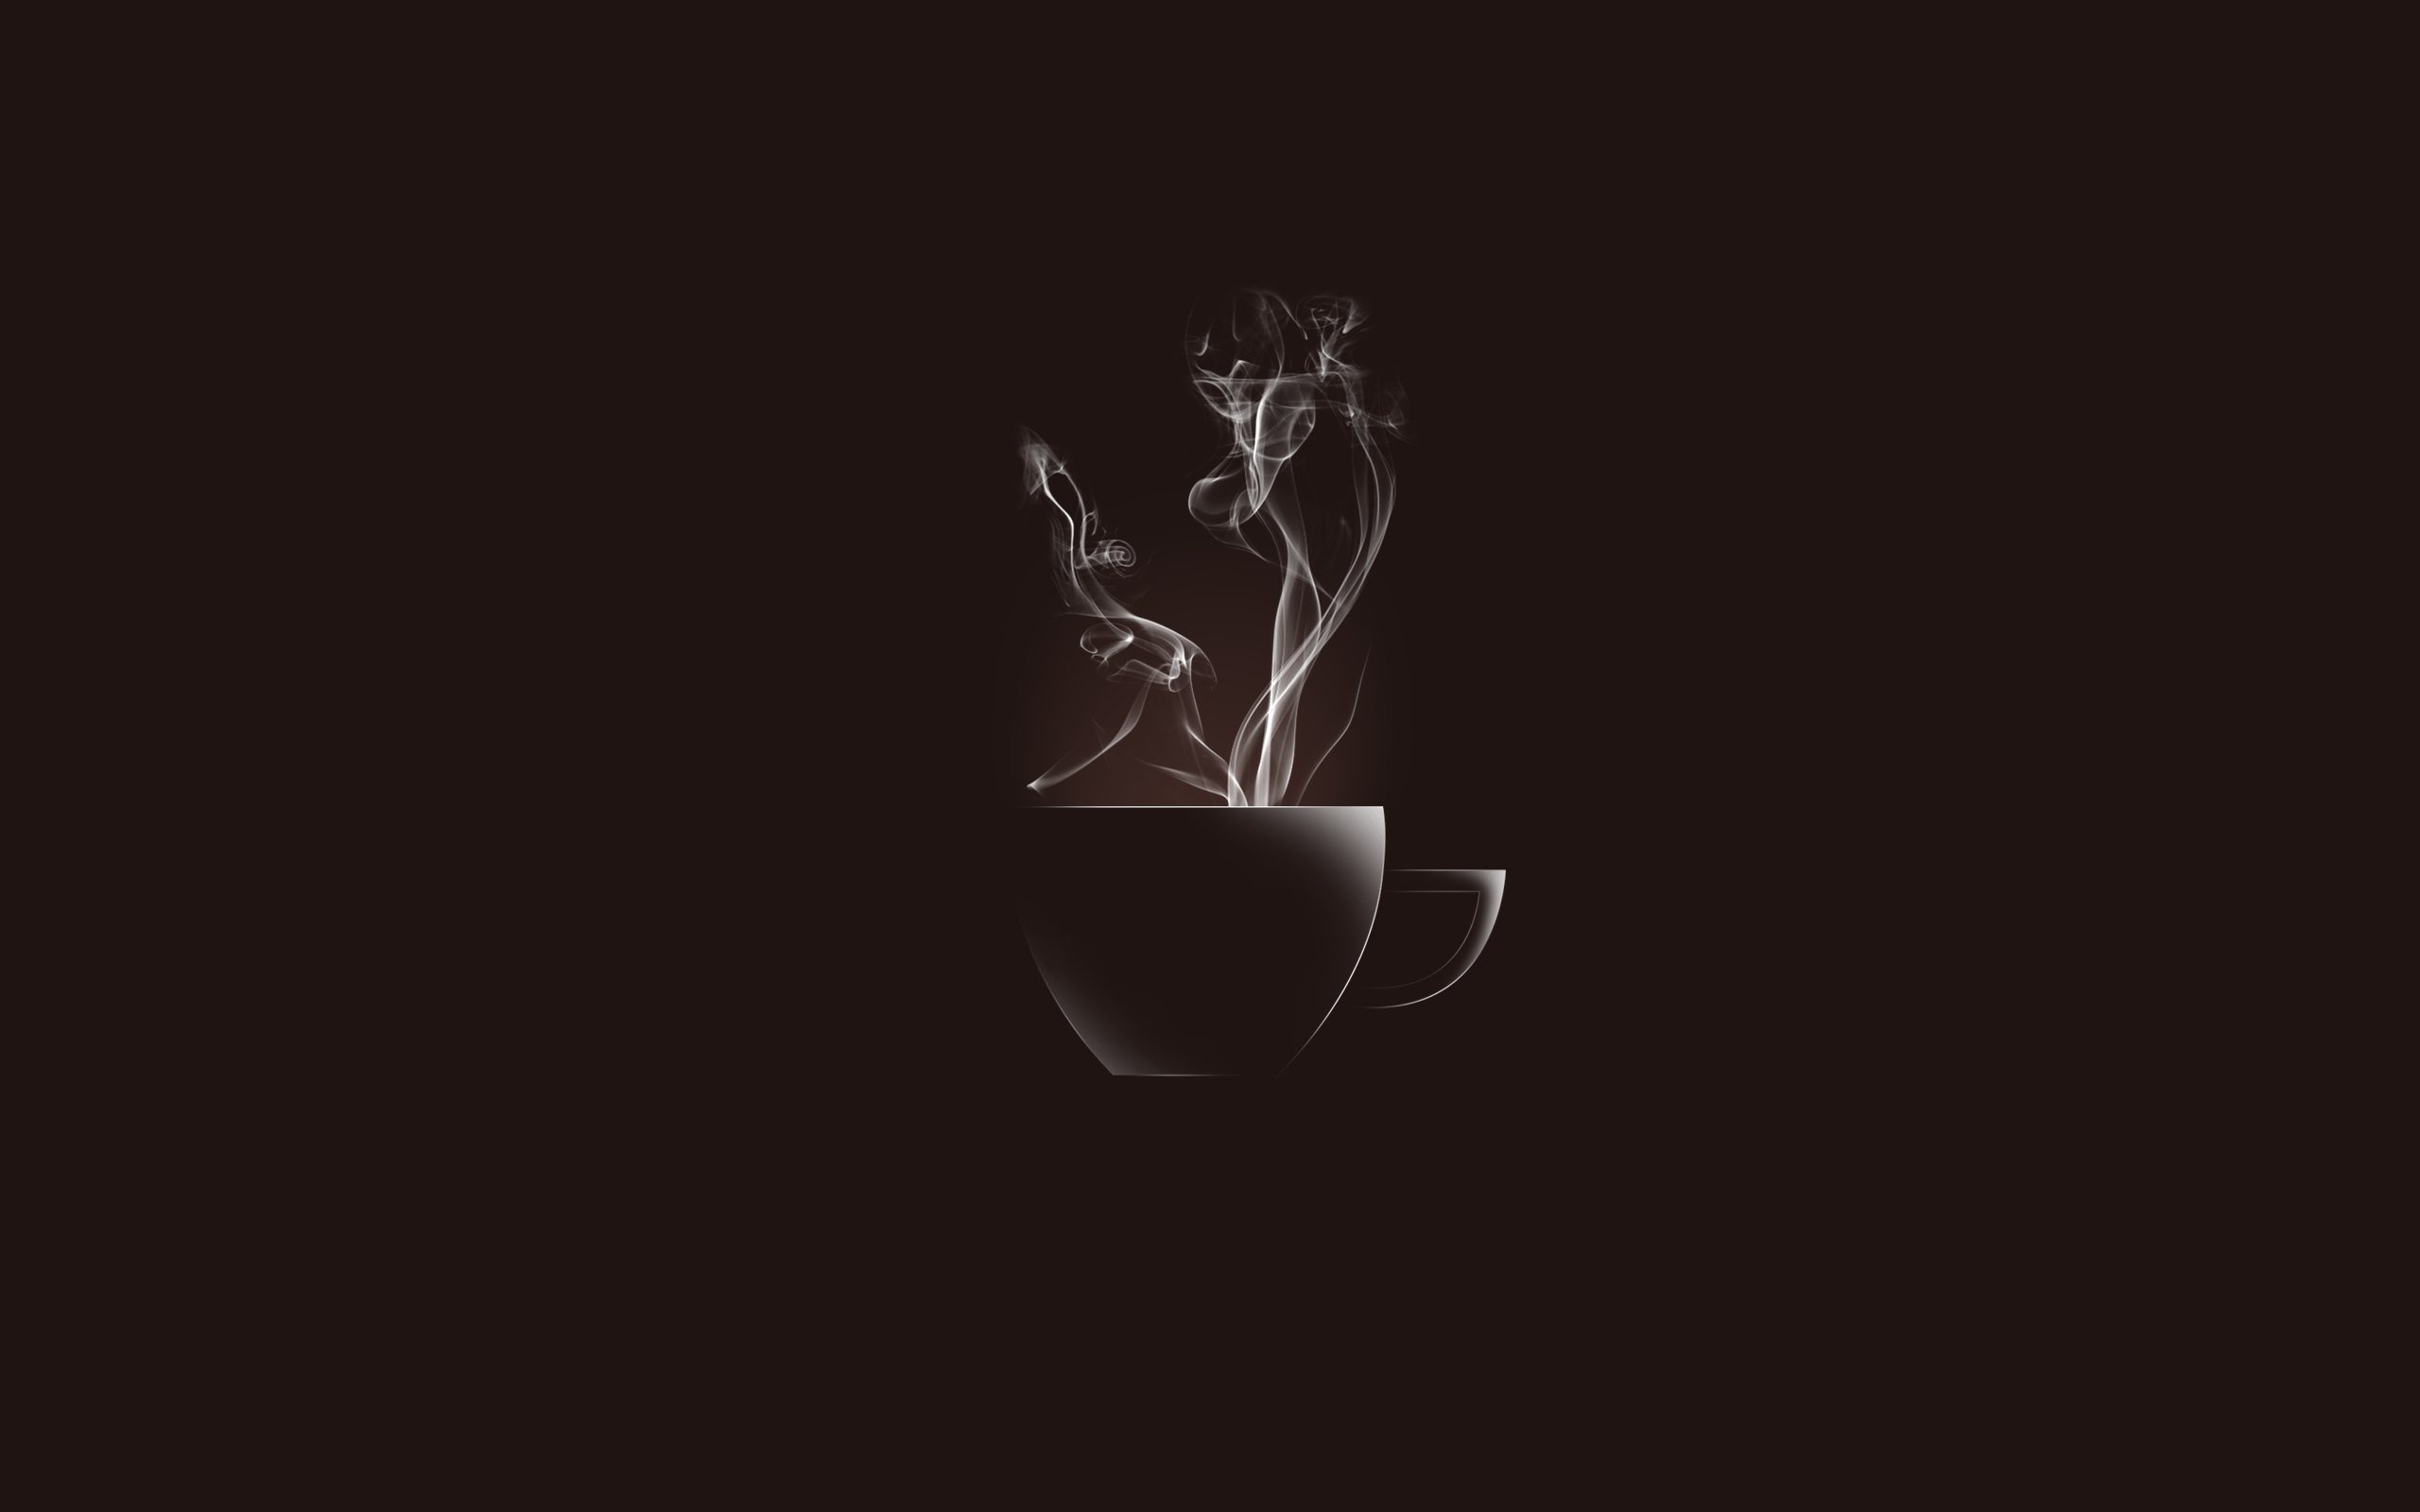 Tea in darkness: A captivating still life featuring a steaming cup of tea surrounded by wisps of smoke.